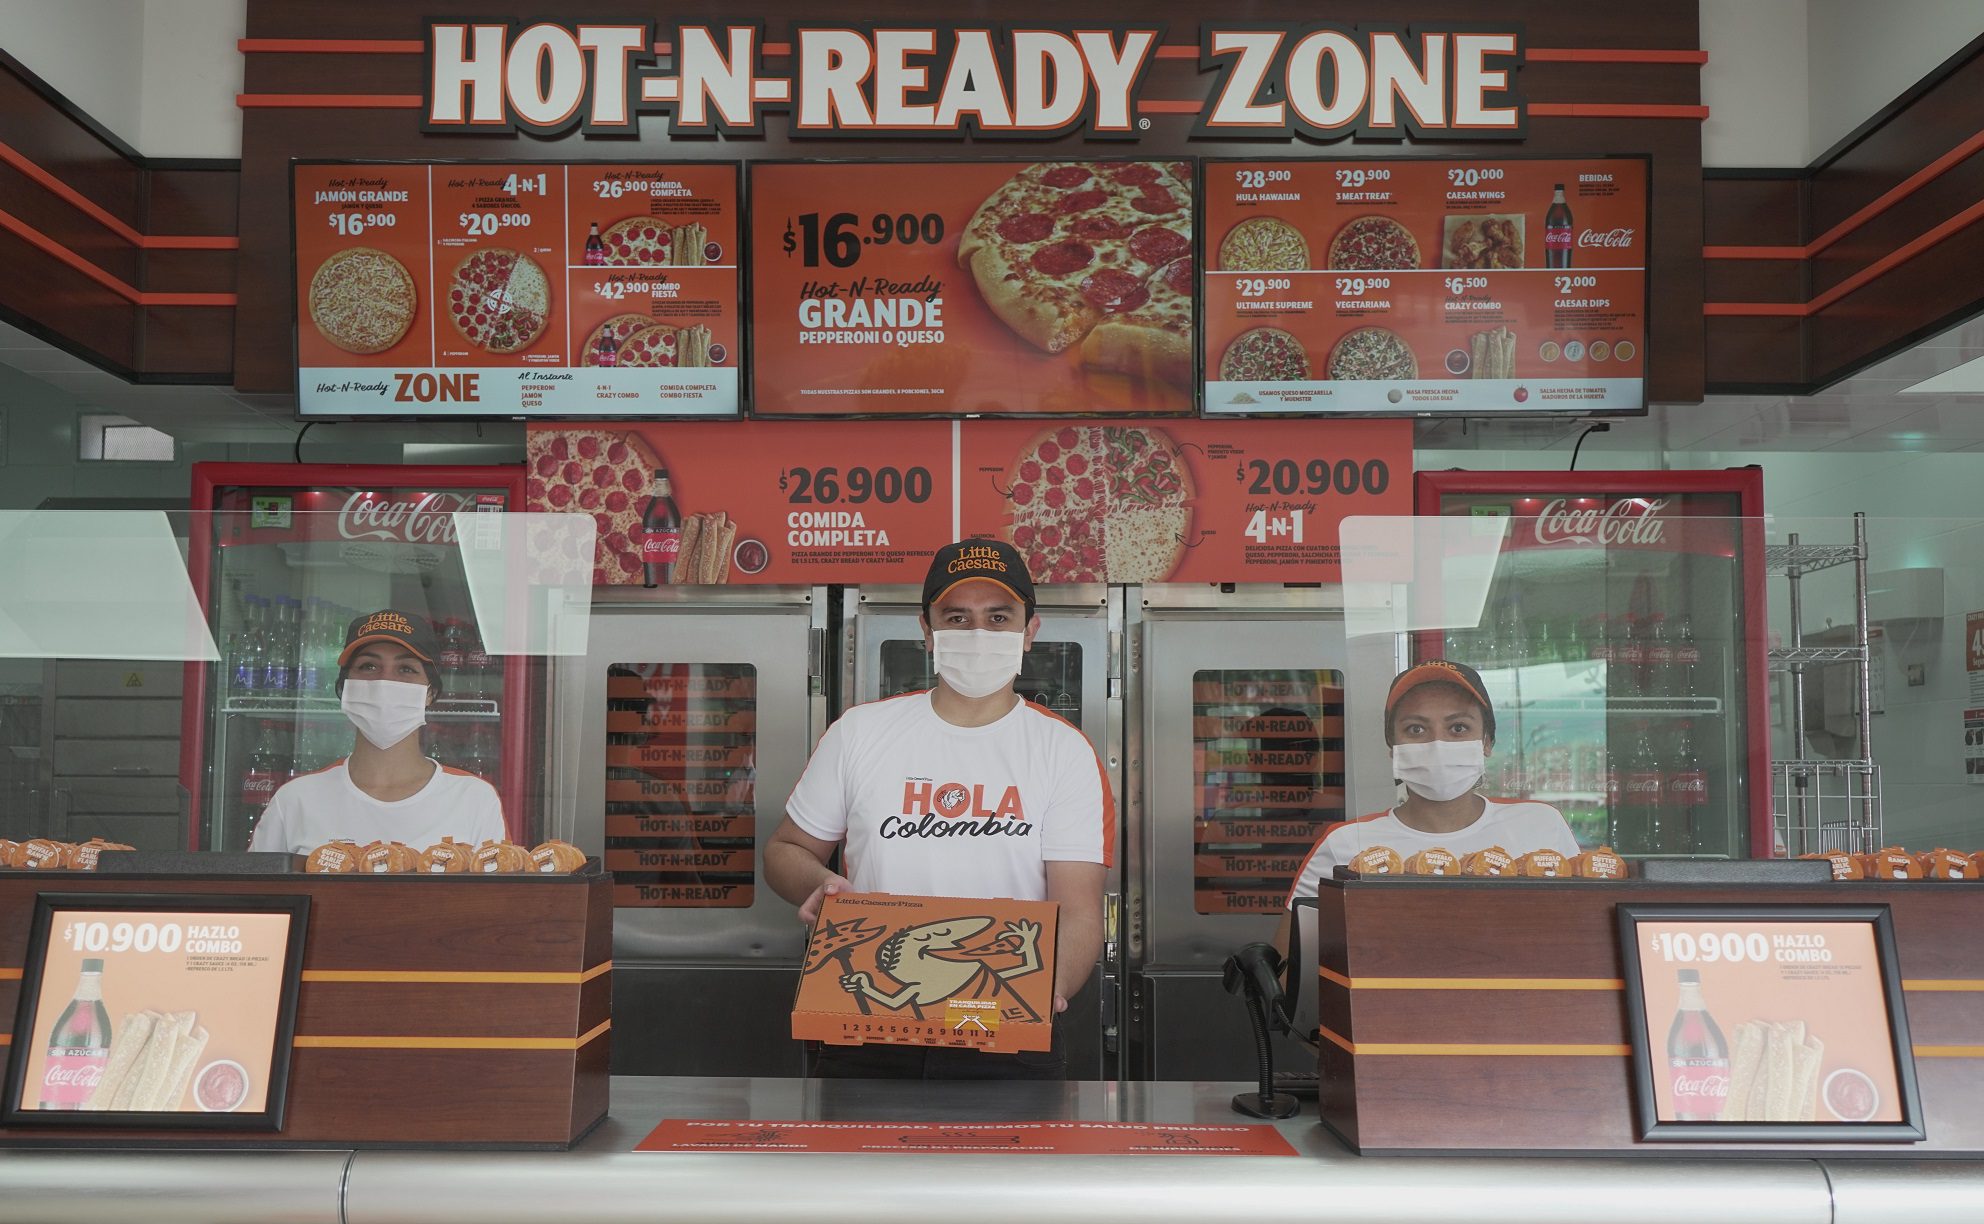 Little Caesars to Open in Colombia, Continuing Global Growth - Ilitch Companies News Hub